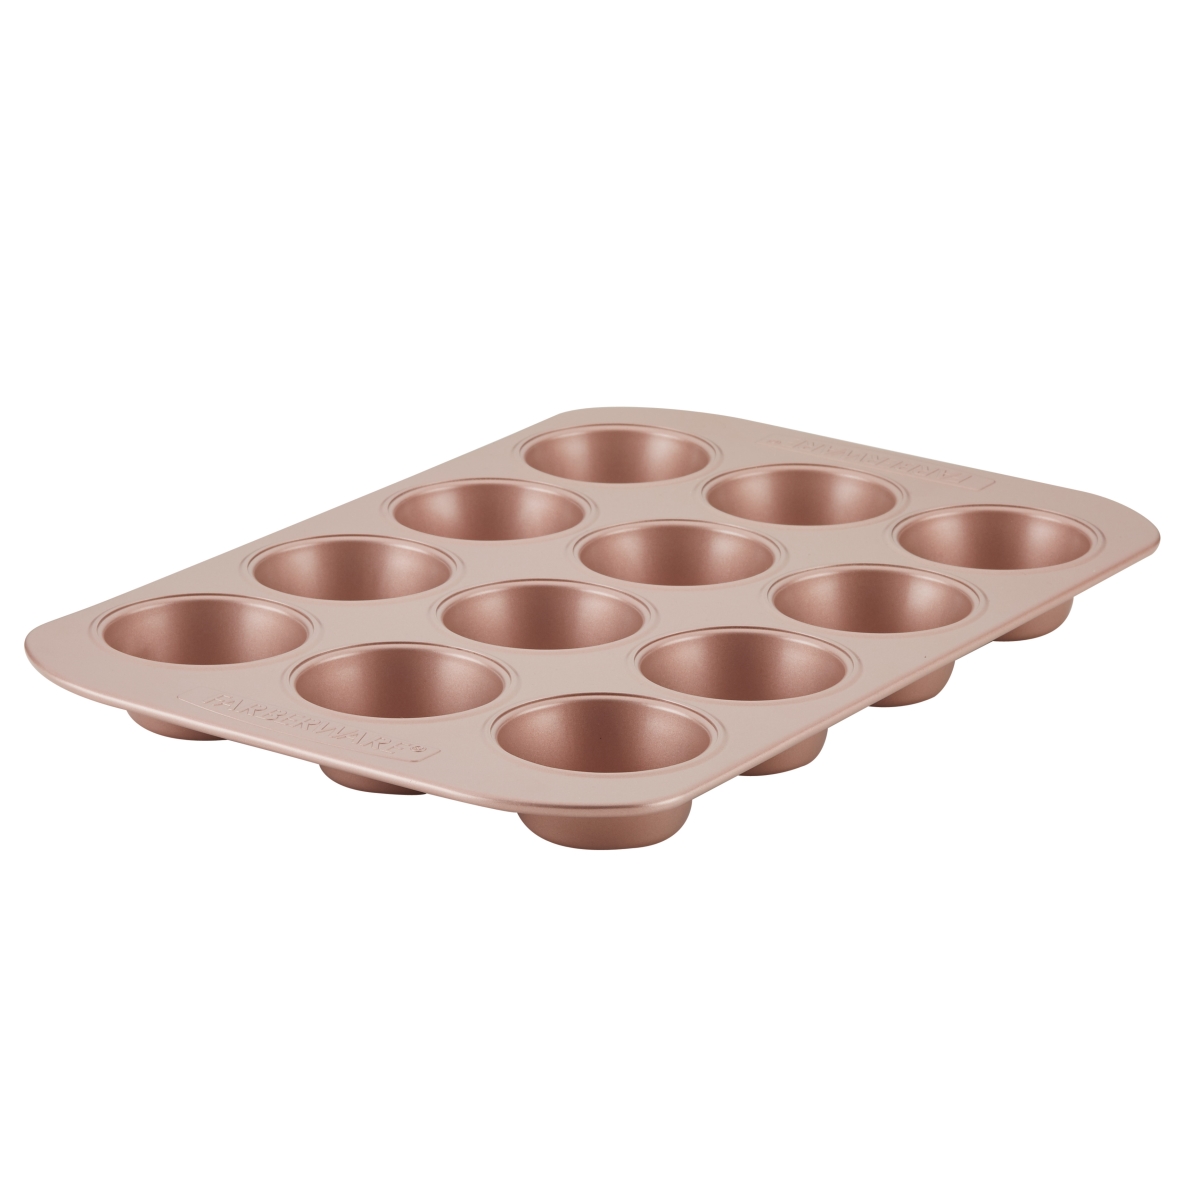 Picture of Farberware 47776 12 Cup Nonstick Bakeware Muffin Pan - Rose Gold